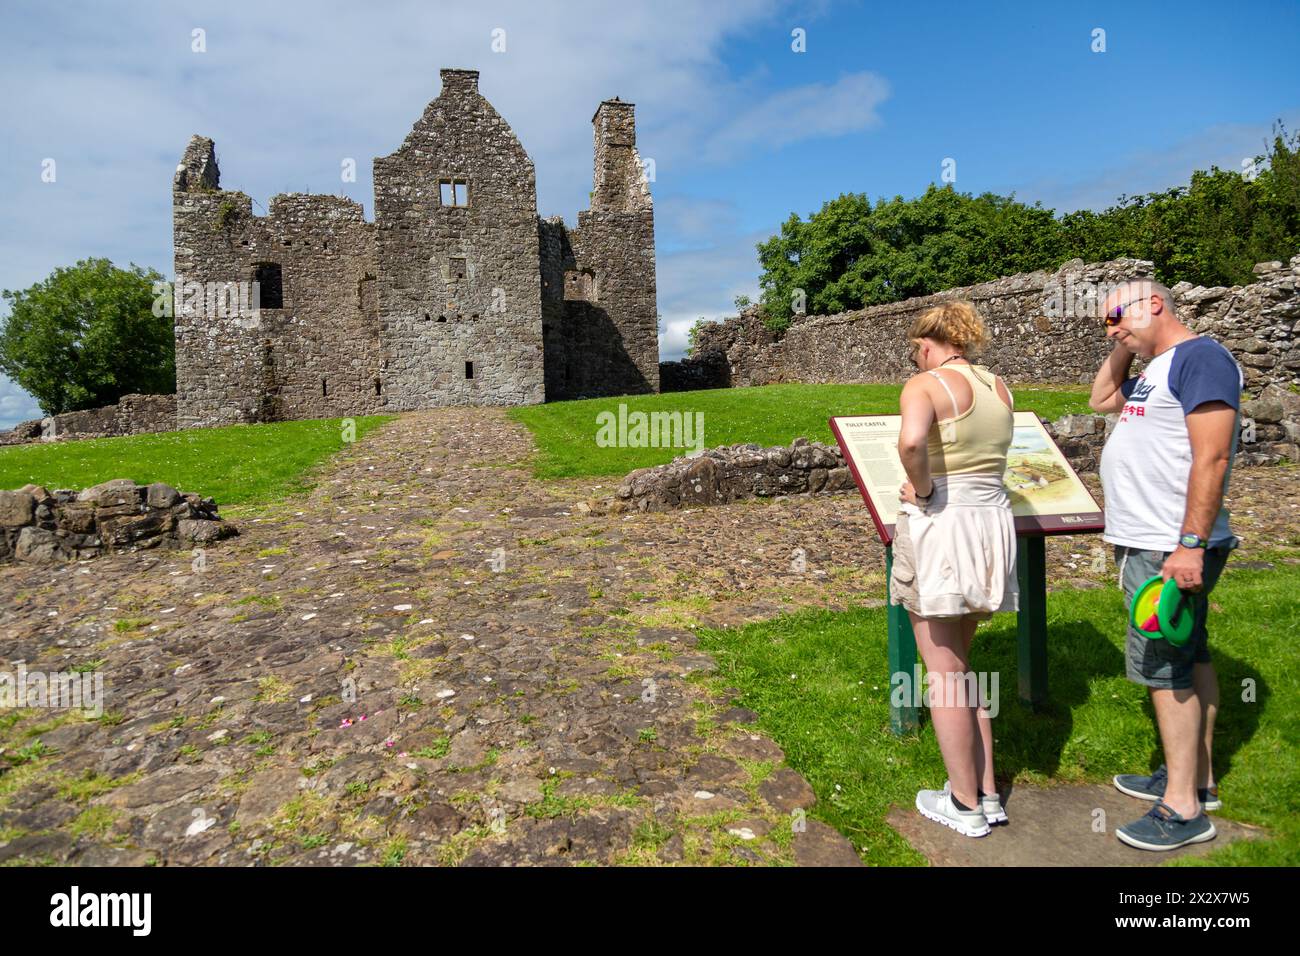 20.07.2019, Tully, County Tyrone, Northern Ireland, United Kingdom - Tully Castle ruins, built for Ulster-Scots Sir John Hume 1612-1615 and burnt down Stock Photo